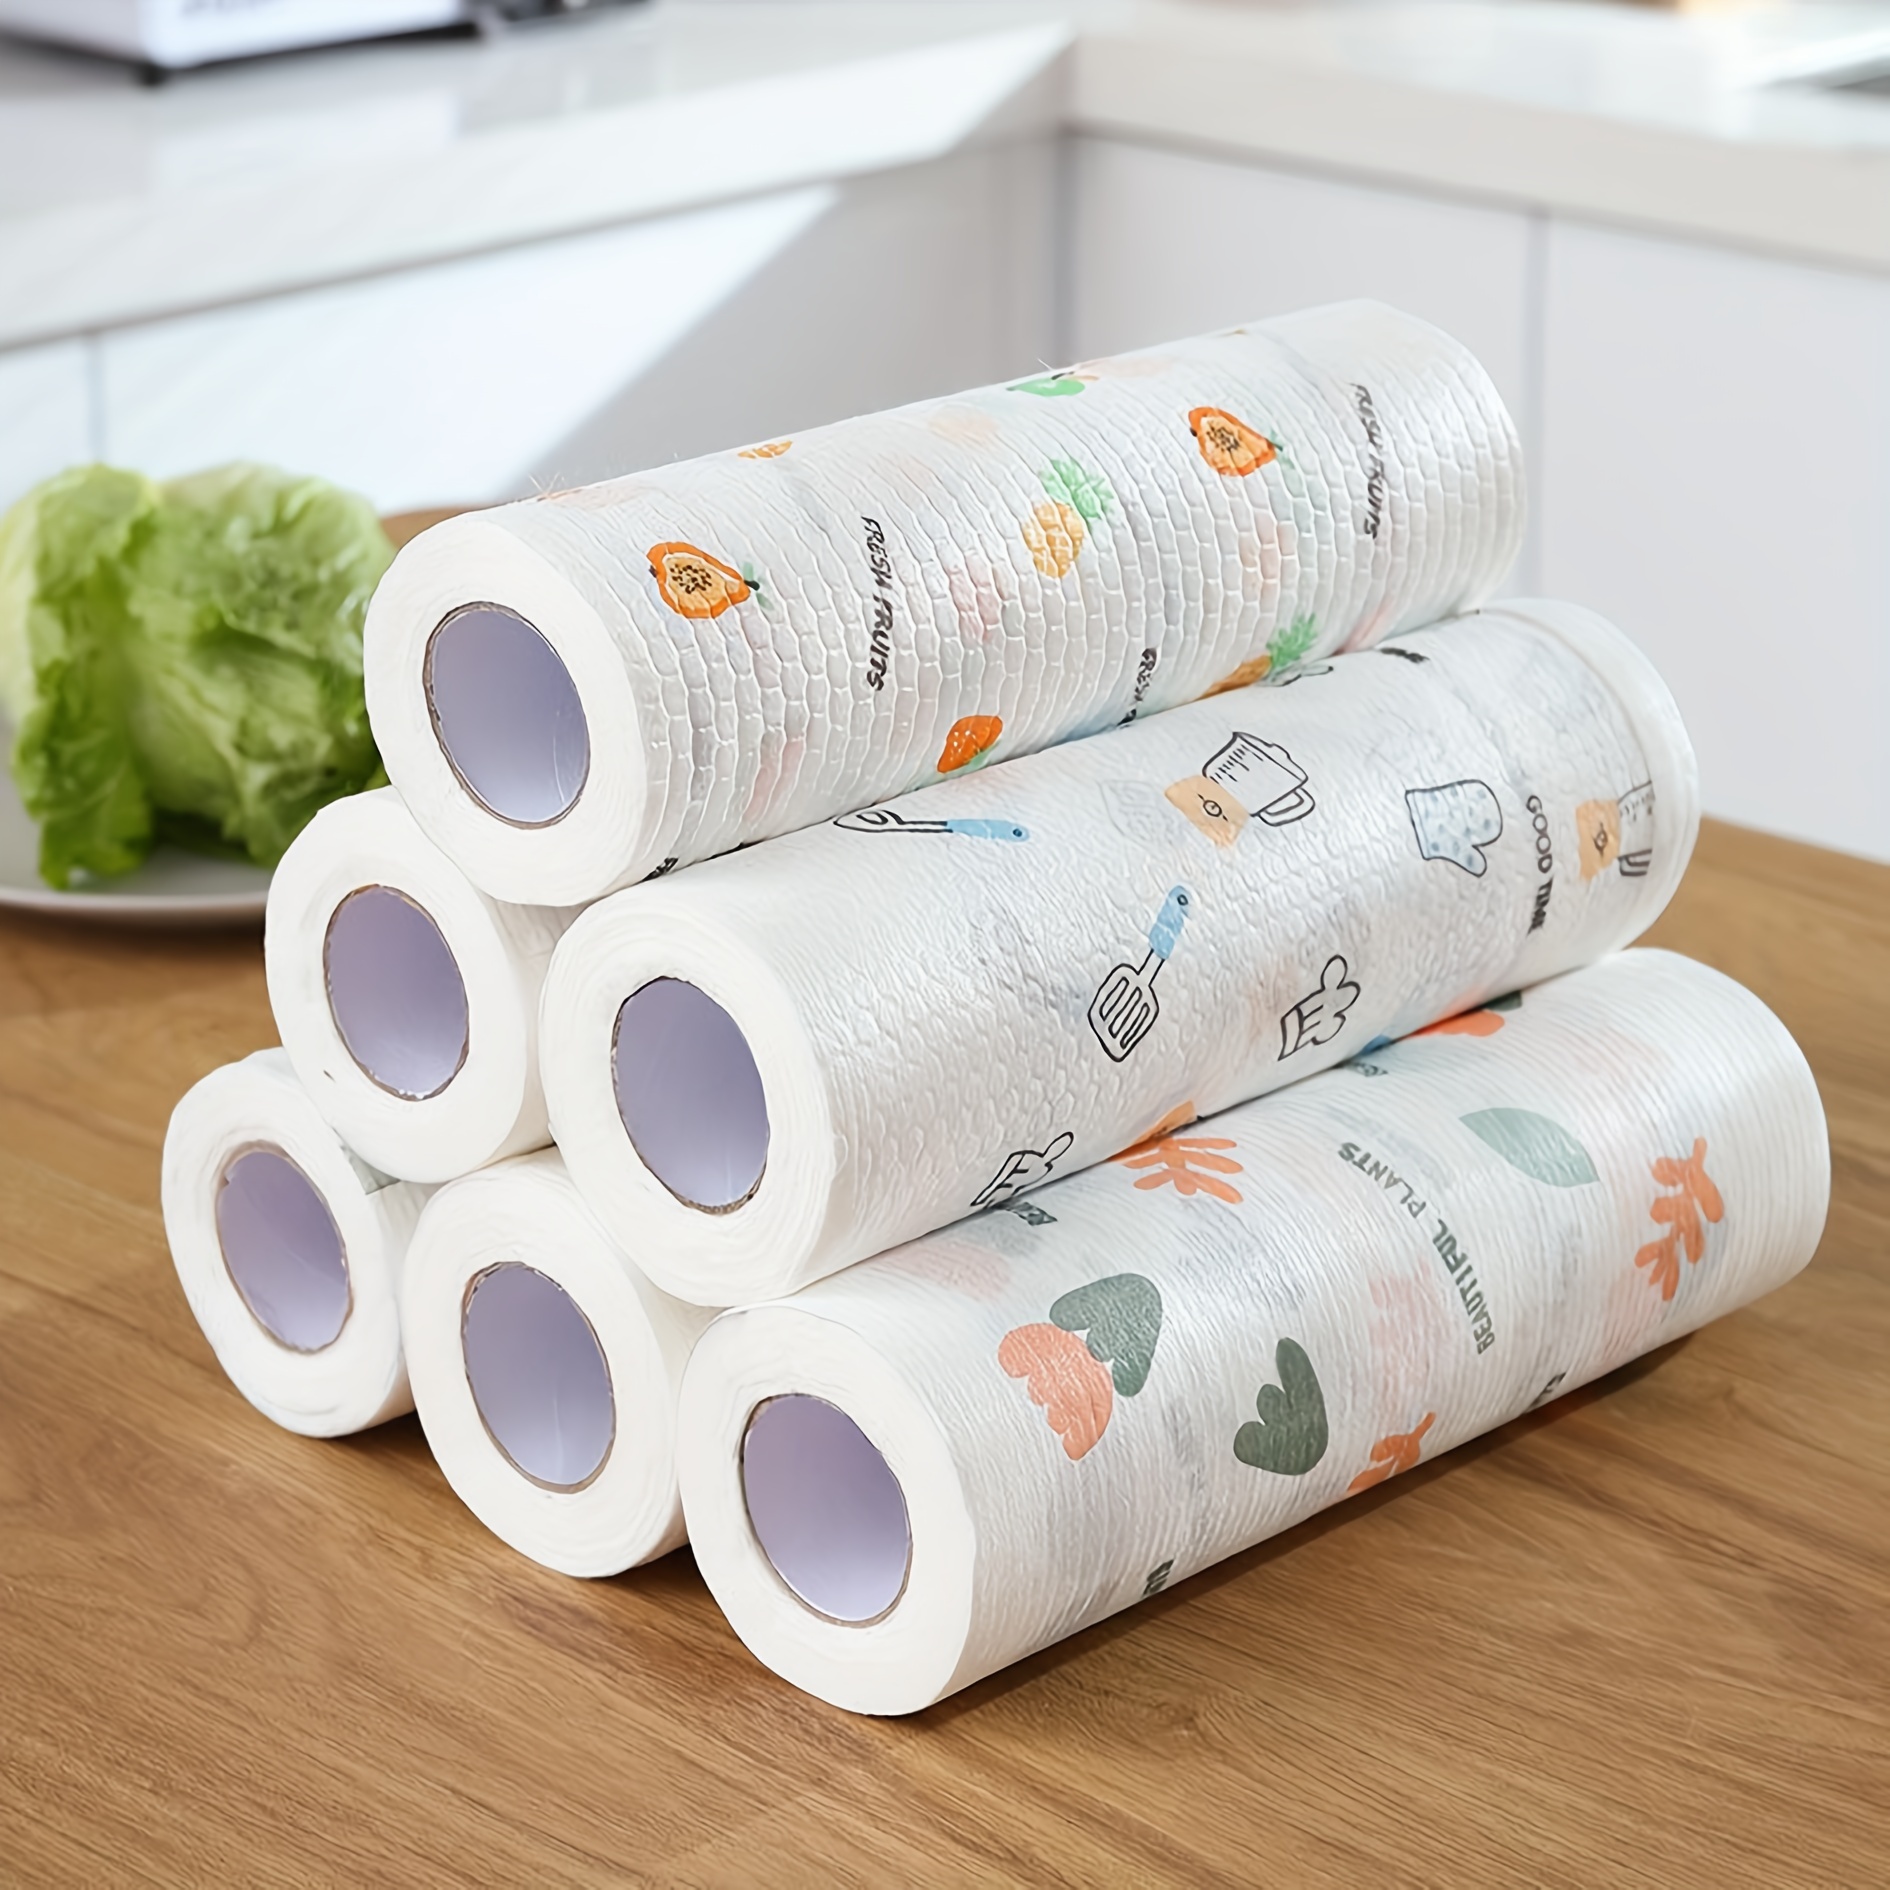 Reusable Kitchen Paper Towels Kitchen Towels, Dish Towes,Cleaning Rags  ,Wiping Pad Dishcloth Bathroom Wash Lazy Rags 50Pcs/Roll - AliExpress